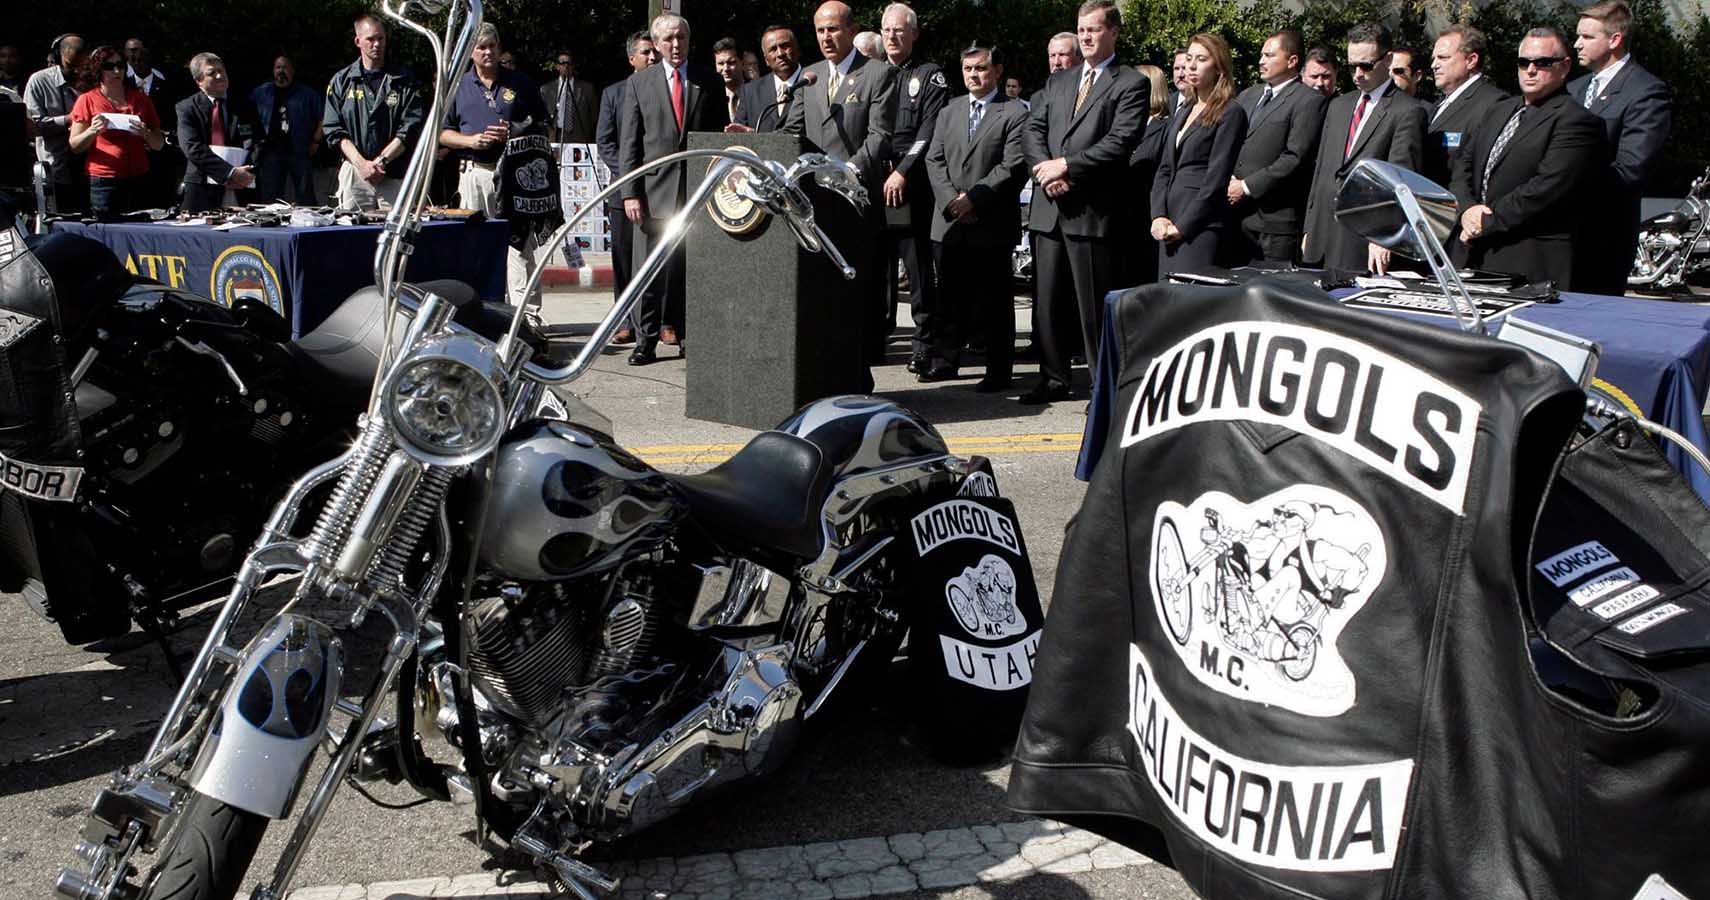 At Motorcycle Clubs, The S**t Does Hit The Fan